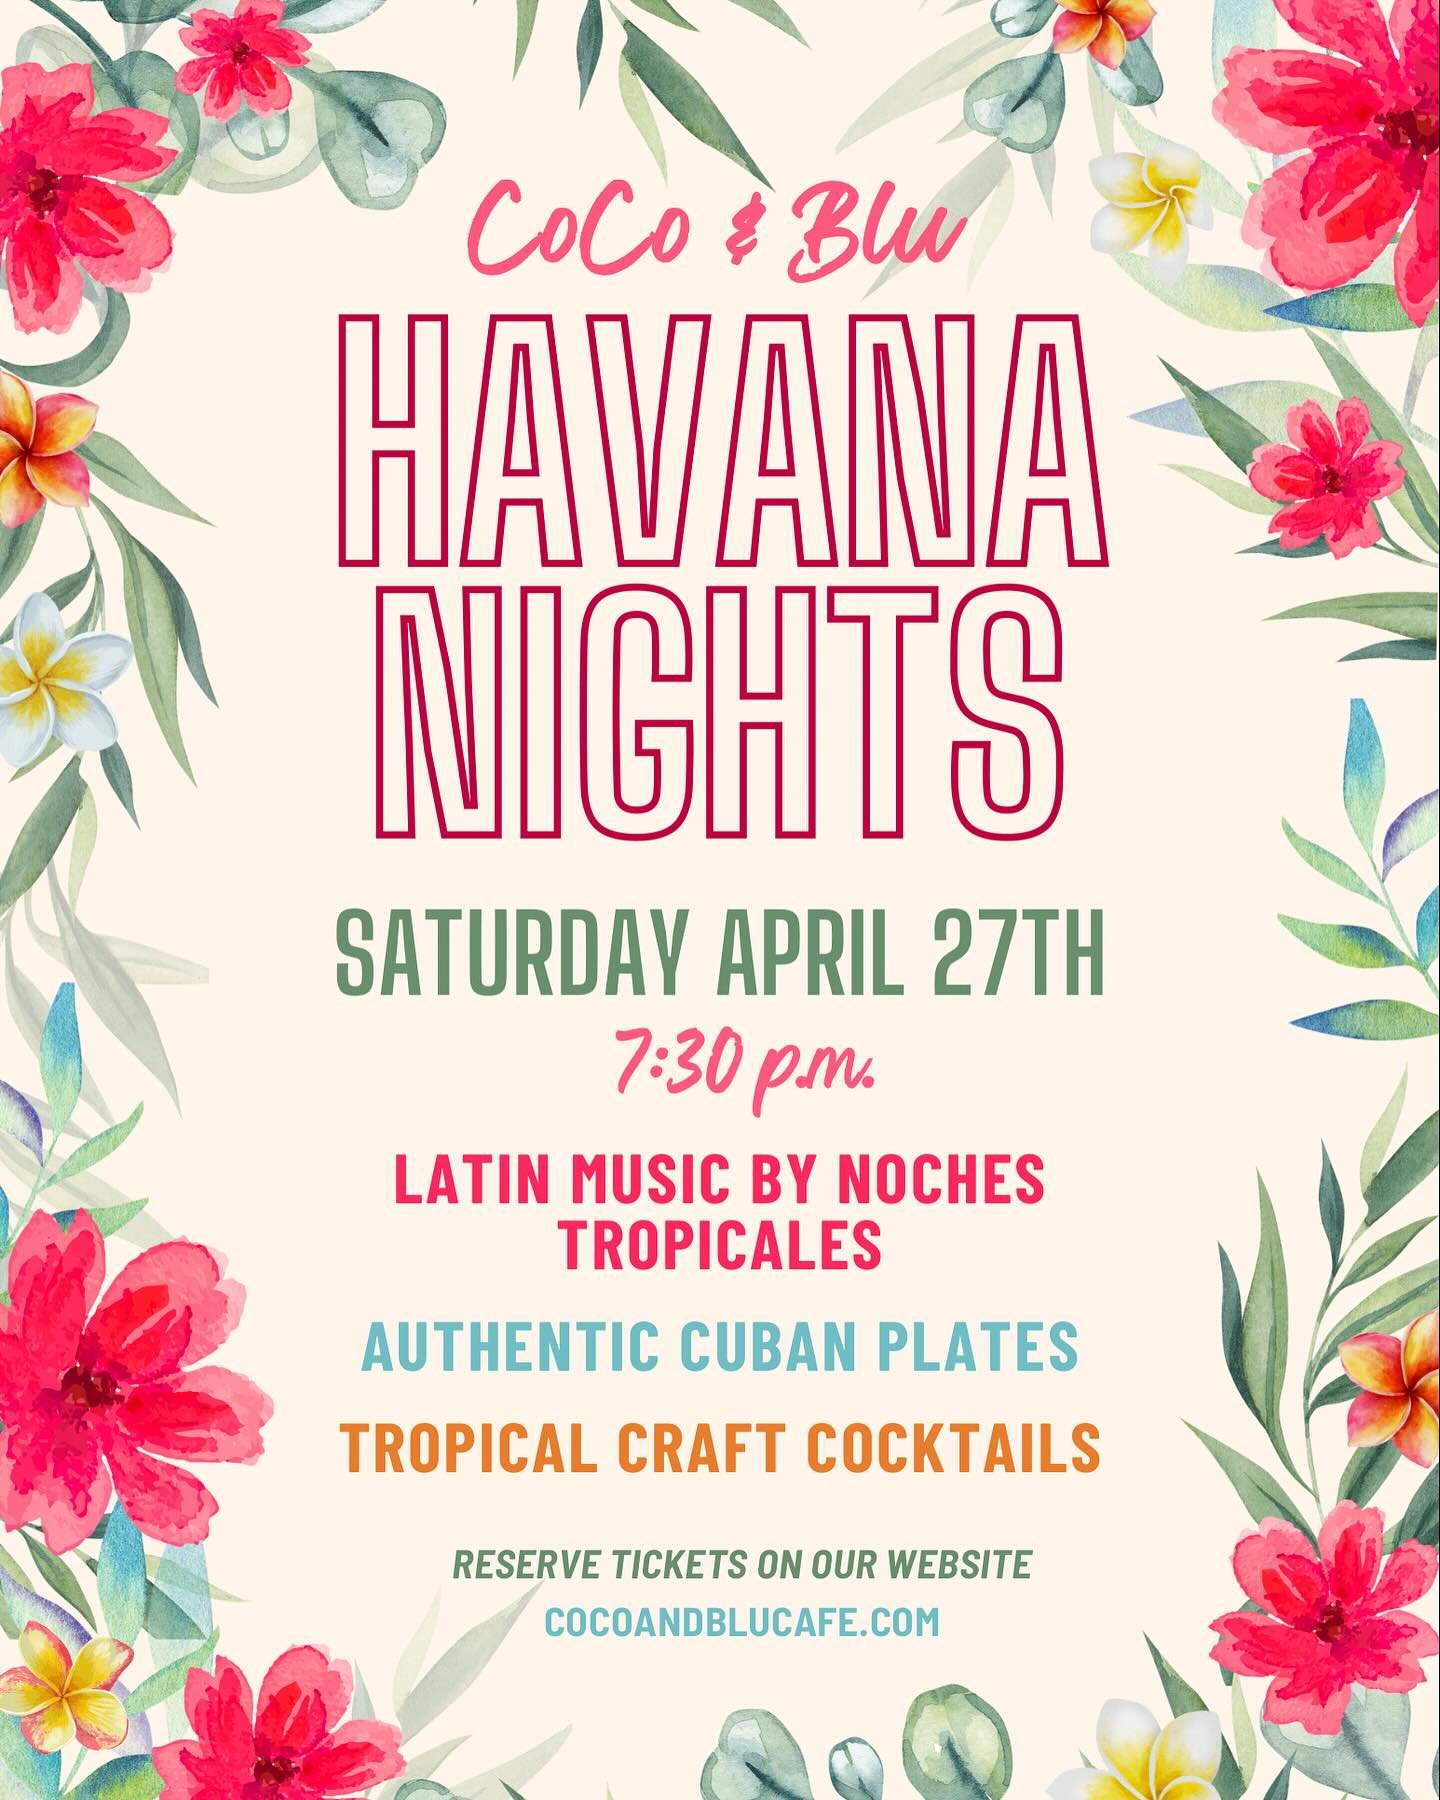 🌺🌞Summer is soon to come! 🤩🌸

It&rsquo;s finally time for our annual Havana Nights! 🏝️ On Saturday, April 27th come join us in an extravagant night featuring music from Noches Tropicales, authentic food and cocktails, and great vibes! 🤞🤪

Grab